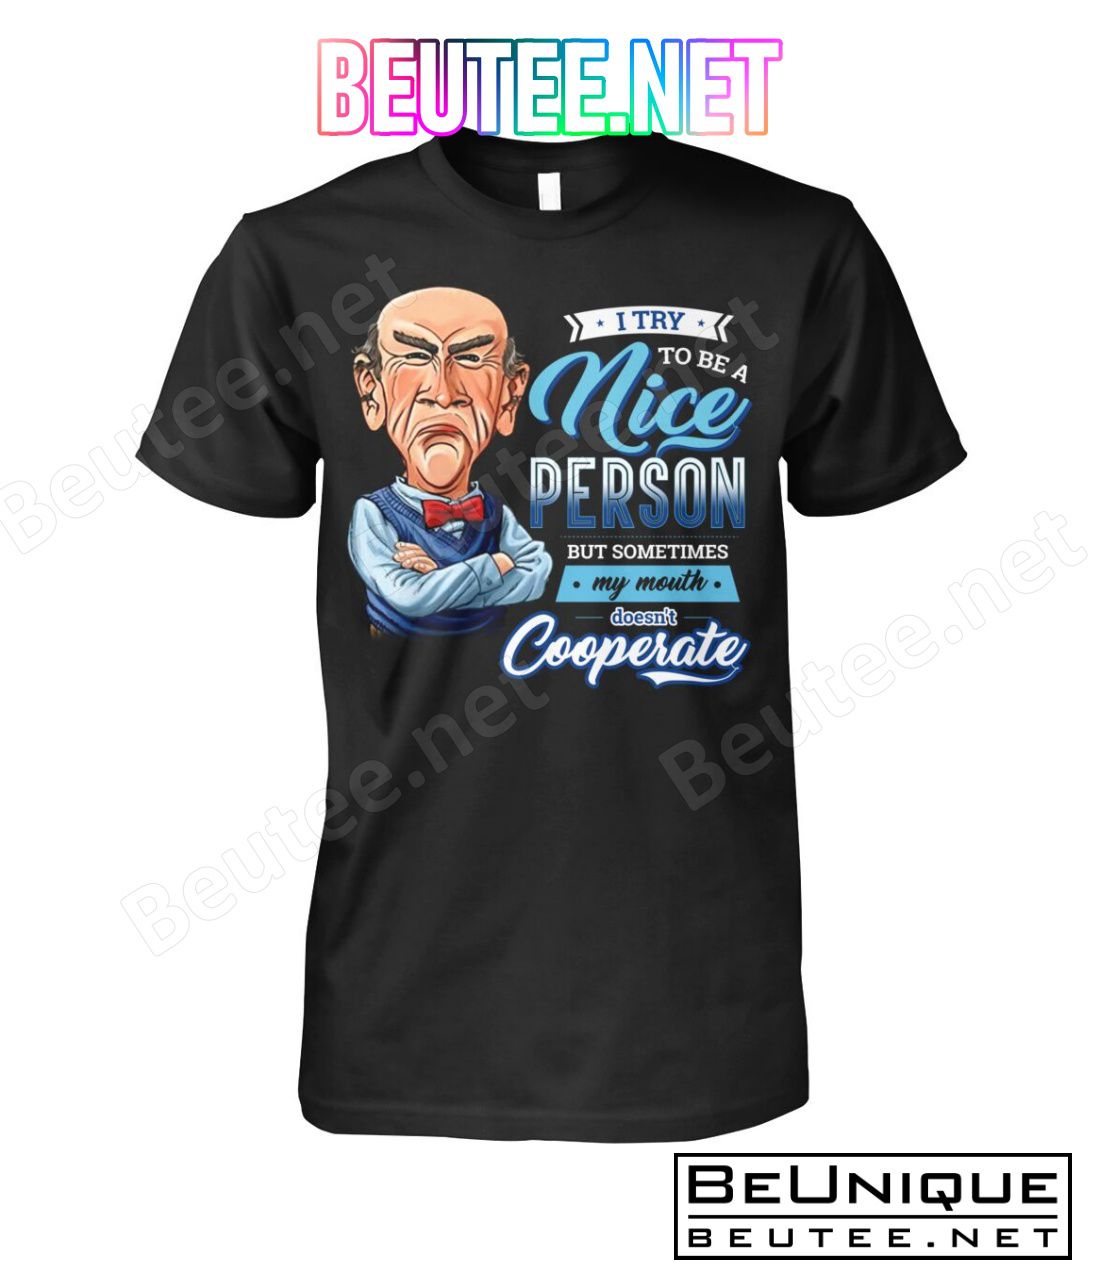 Jeff Dunham I Try To Be A Nice Person But Sometimes My Mouth Doesn't Cooperate Shirt